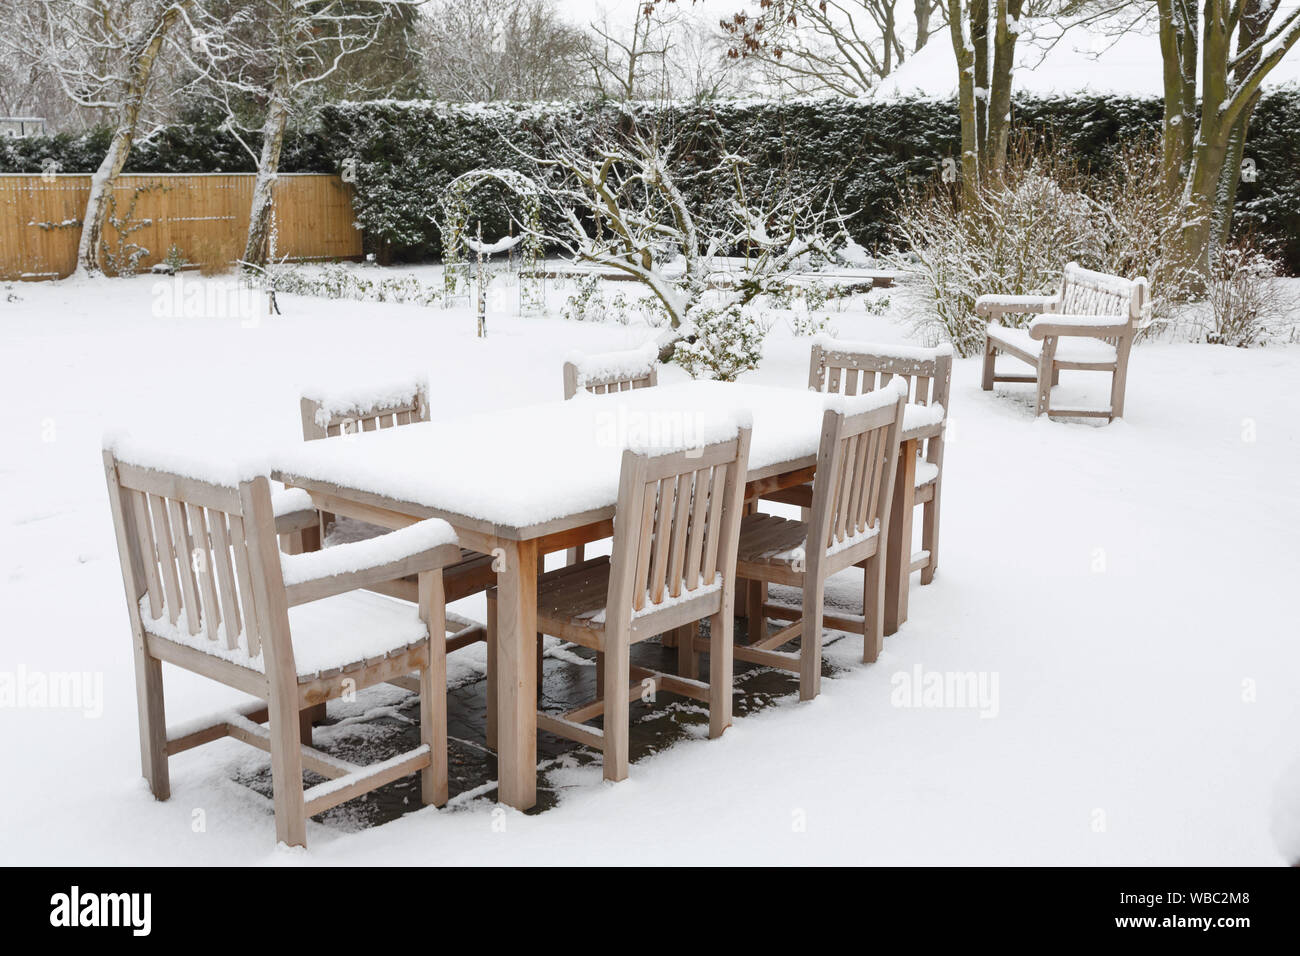 Patio garden furniture covered with snow in winter, UK Stock Photo